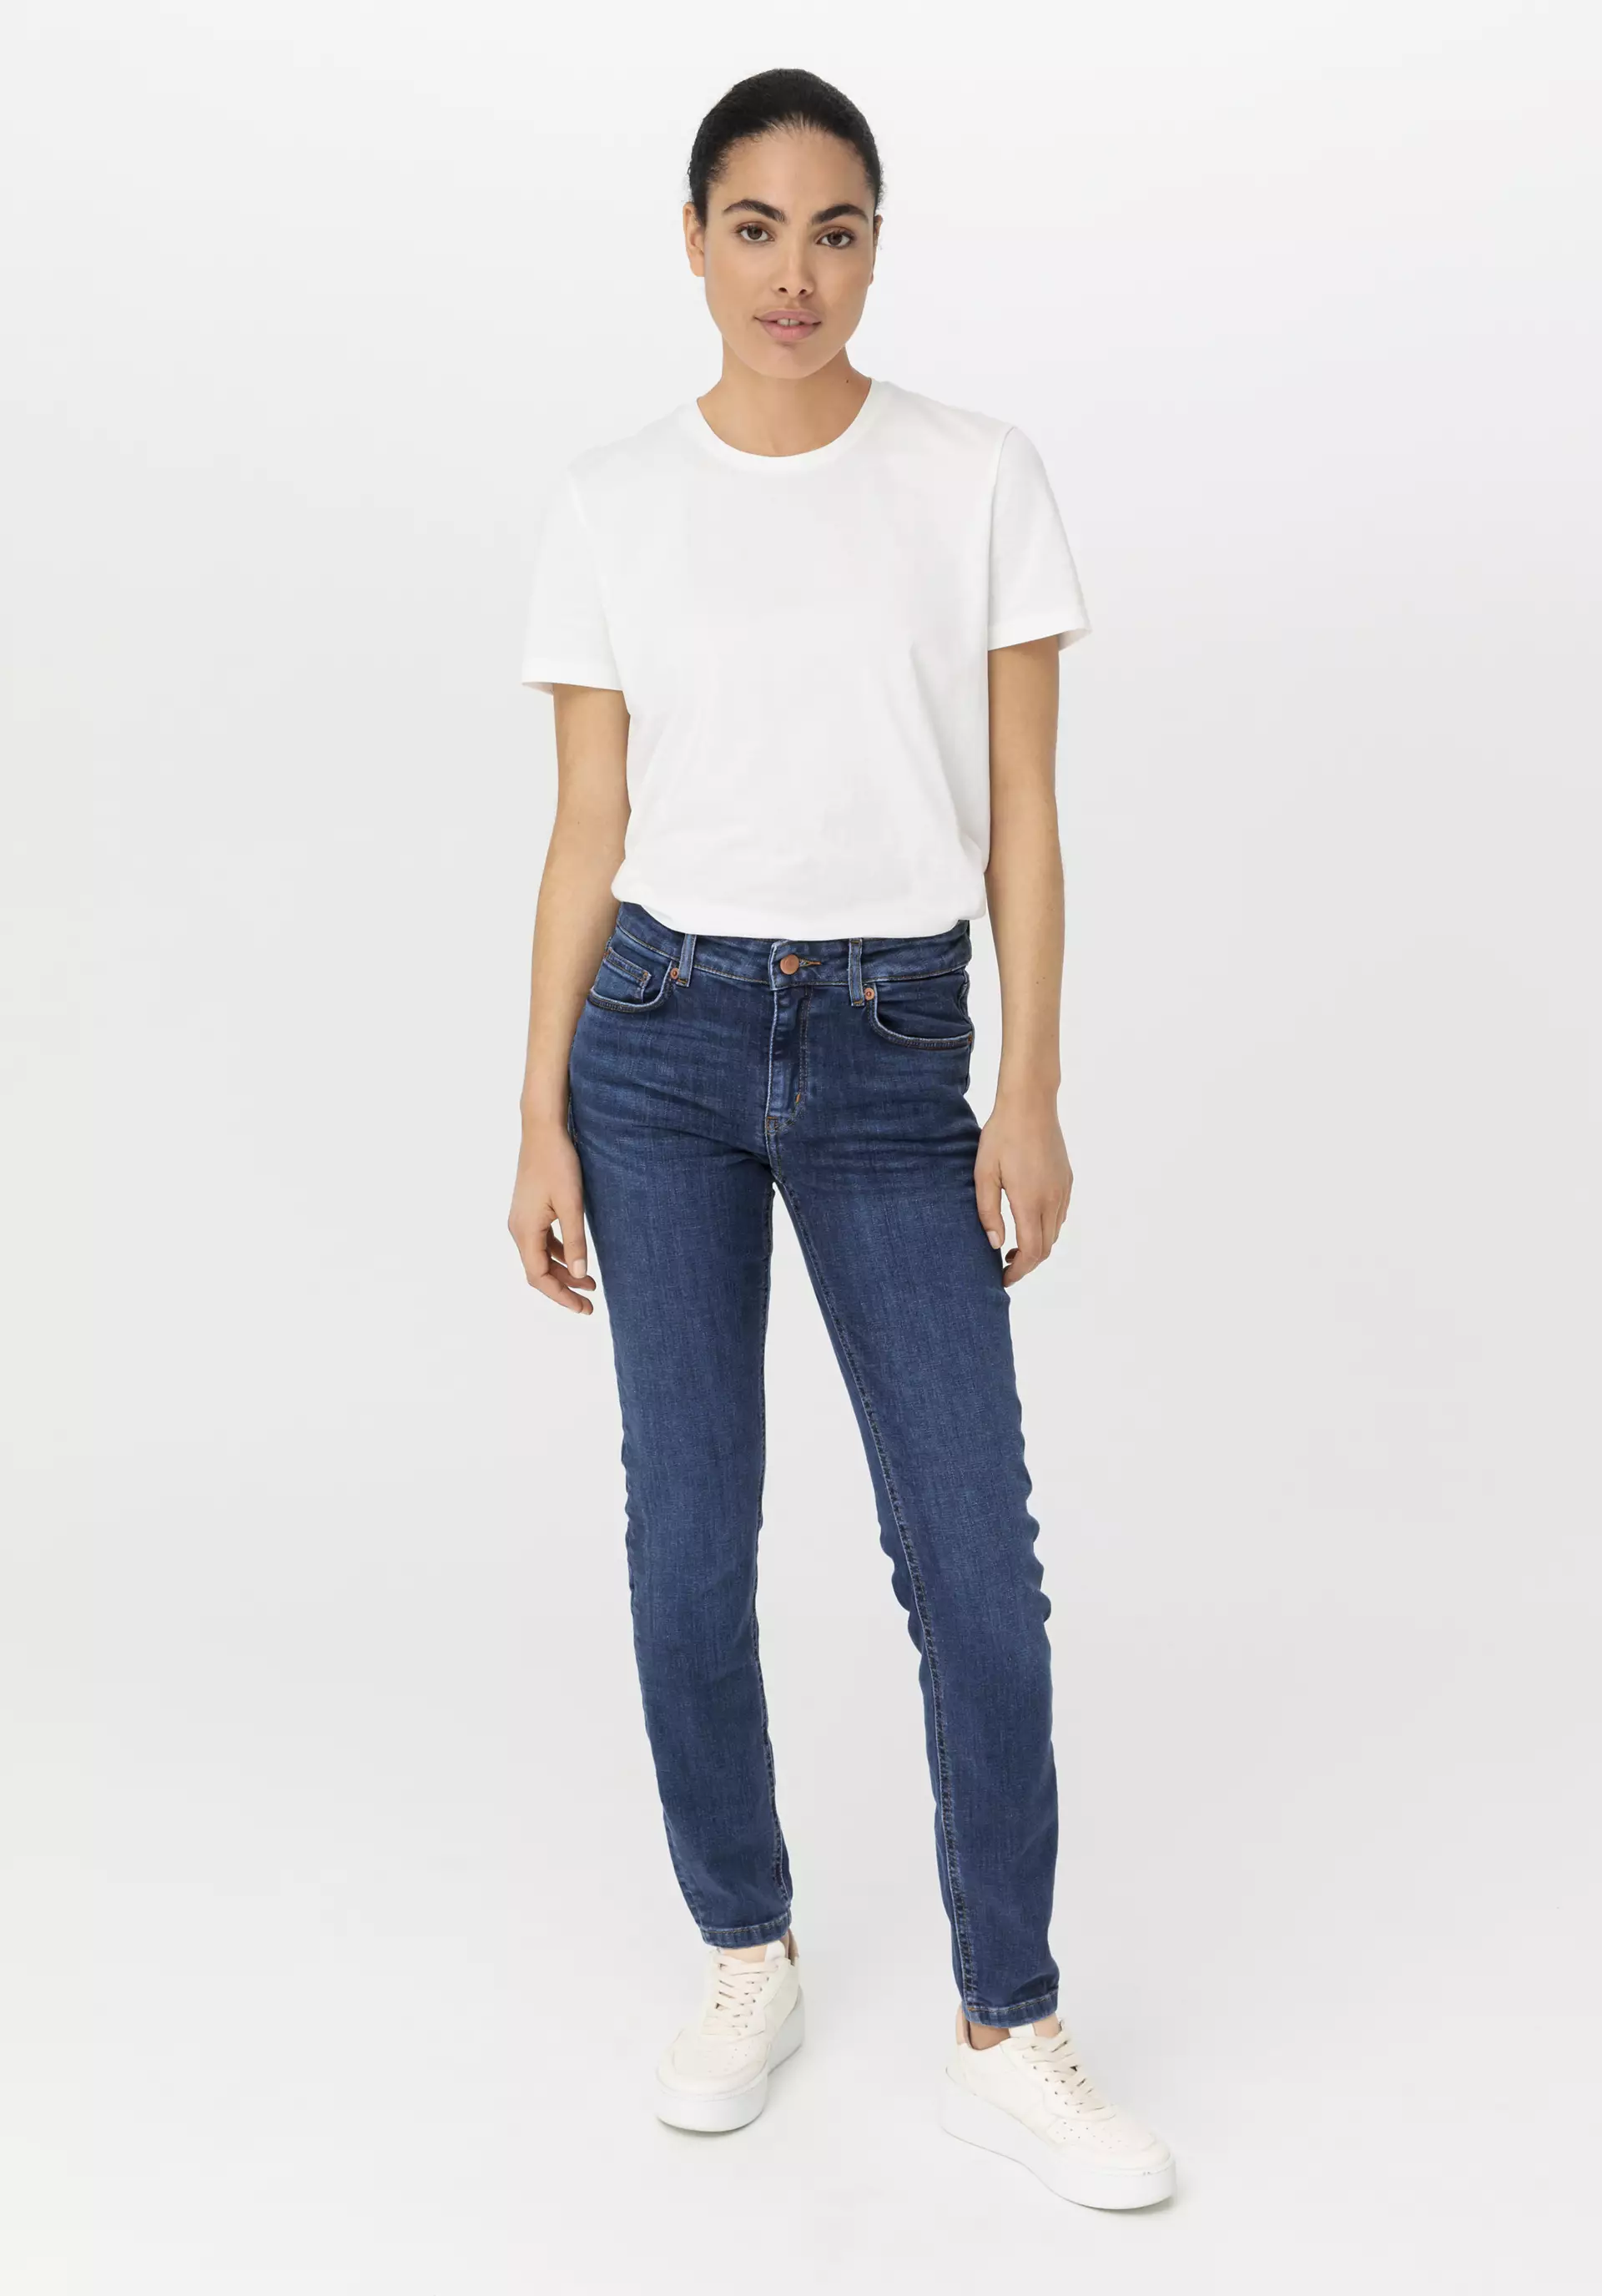 LINA Mid Rise Skinny jeans made from organic denim - 0